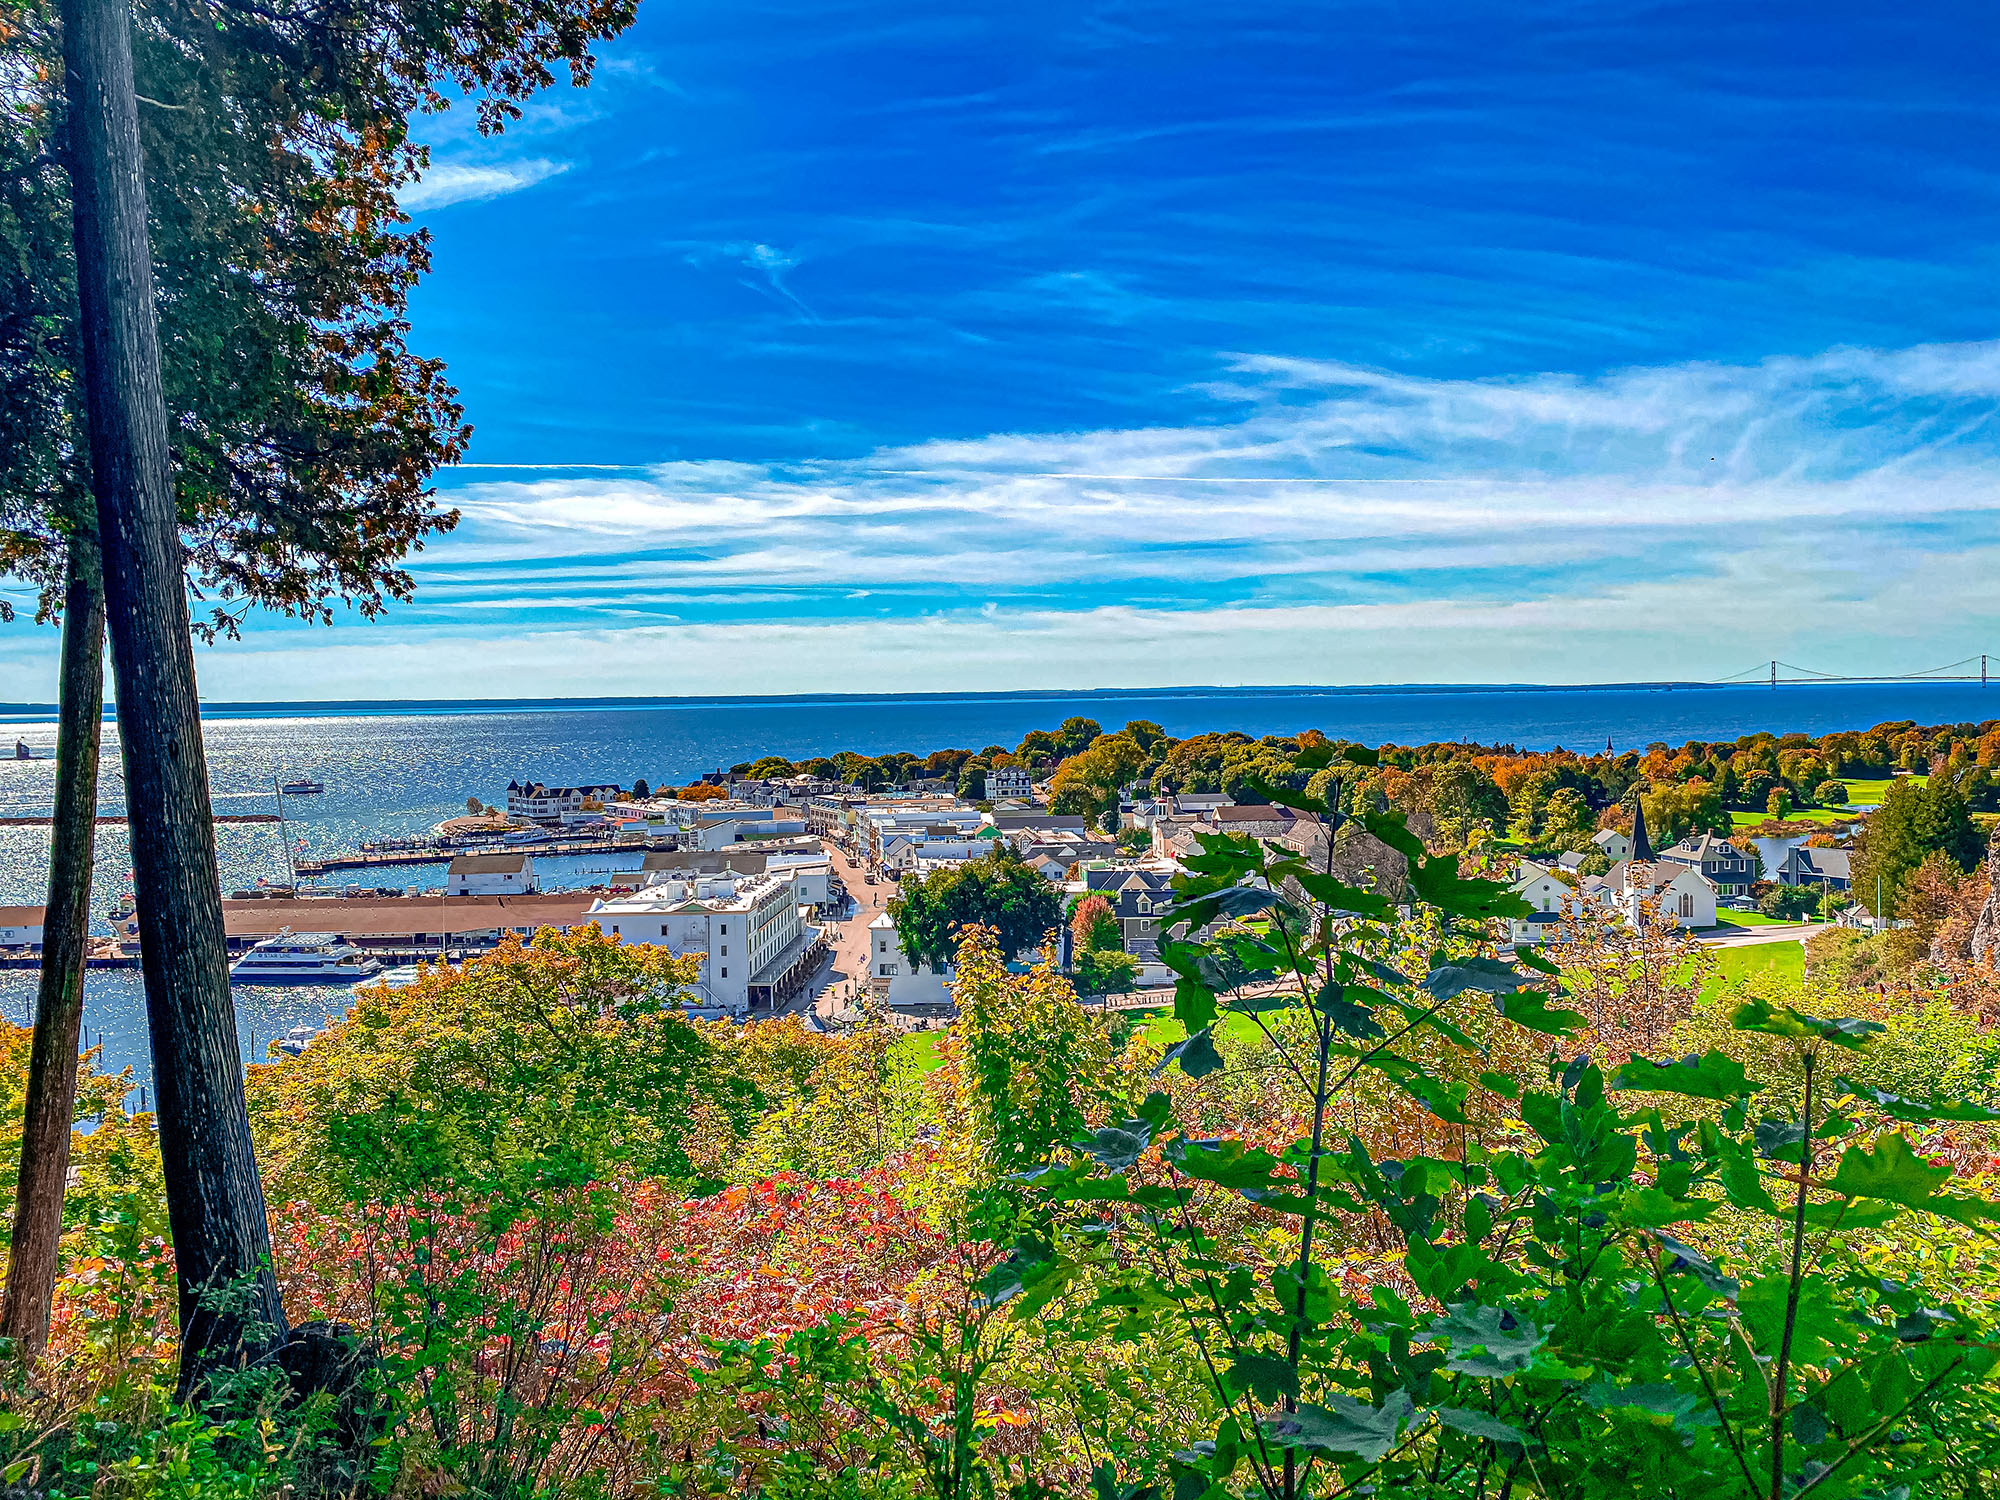 Where to go banner - looking down on Mackinac Island from a hill top.